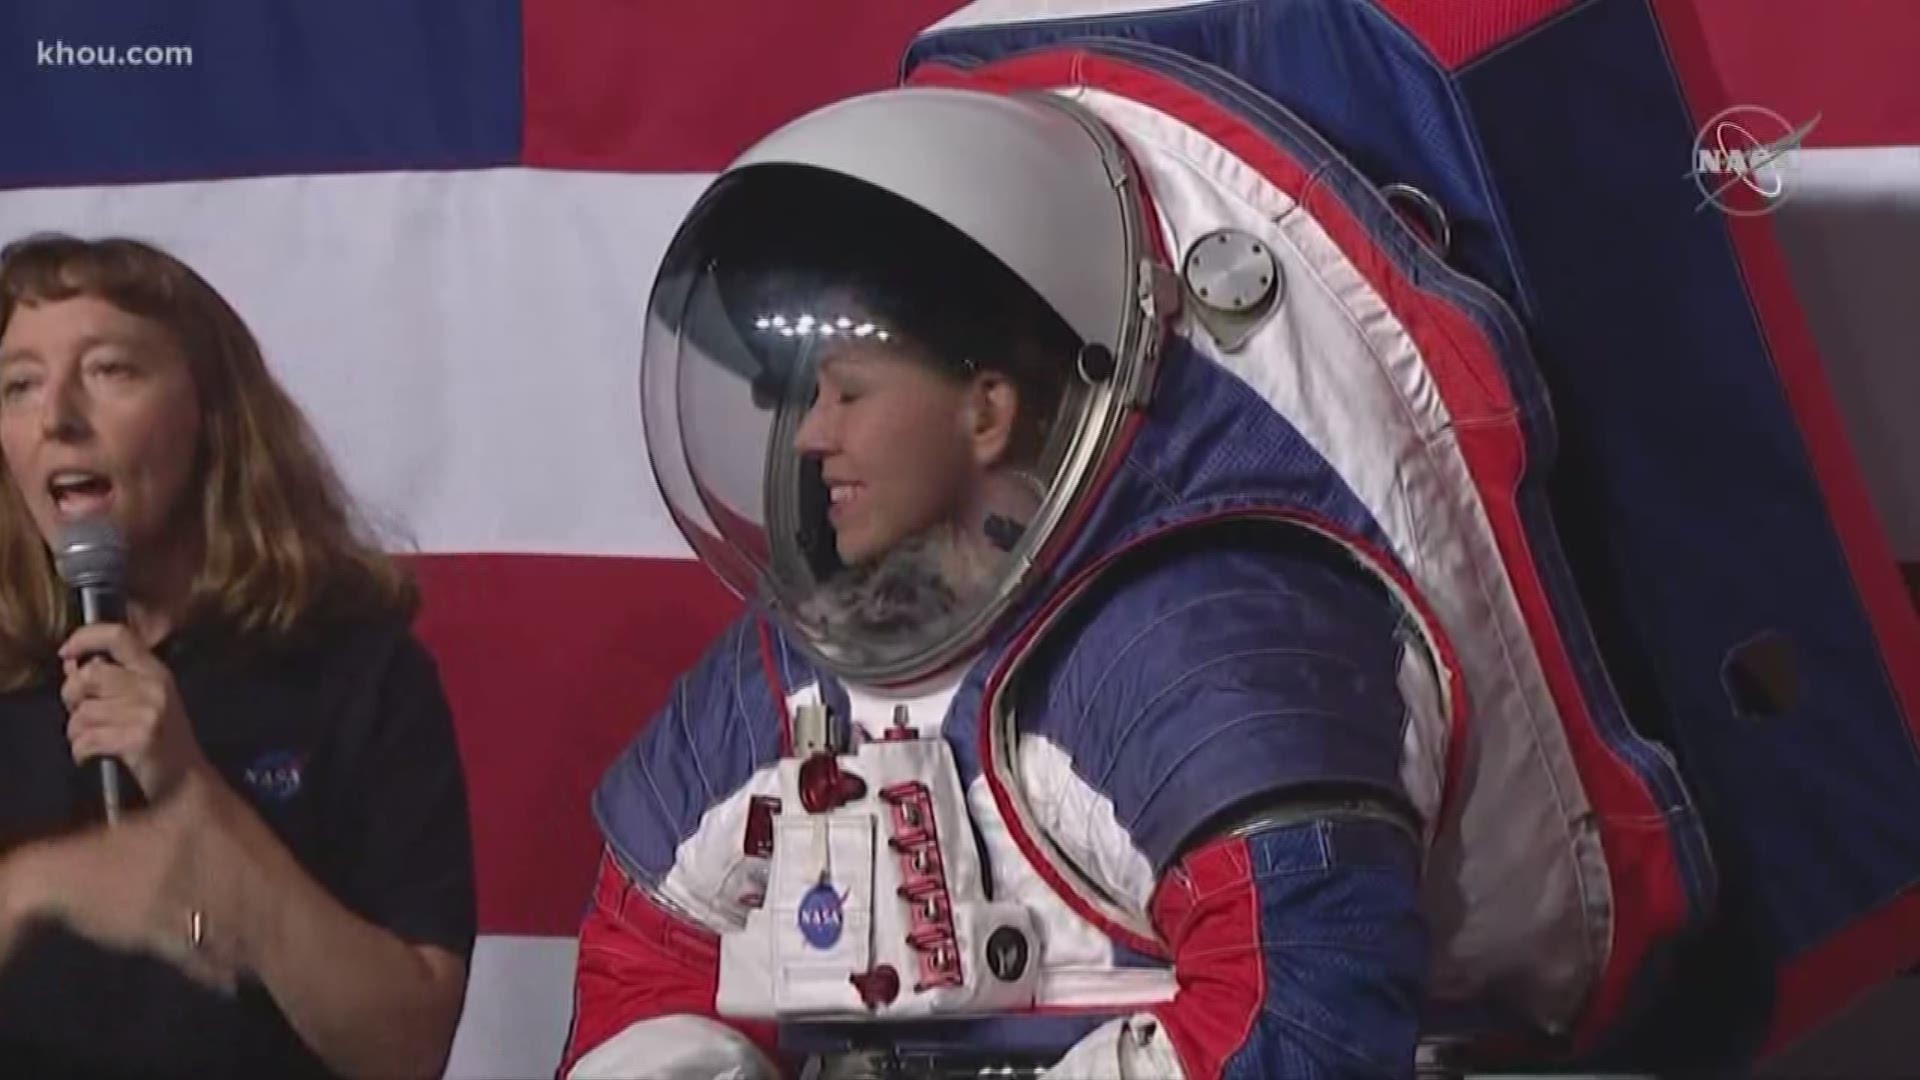 NASA held a fashion show to unveil its newest spacesuits inspired by the original Apollo suits -- with some improvements.